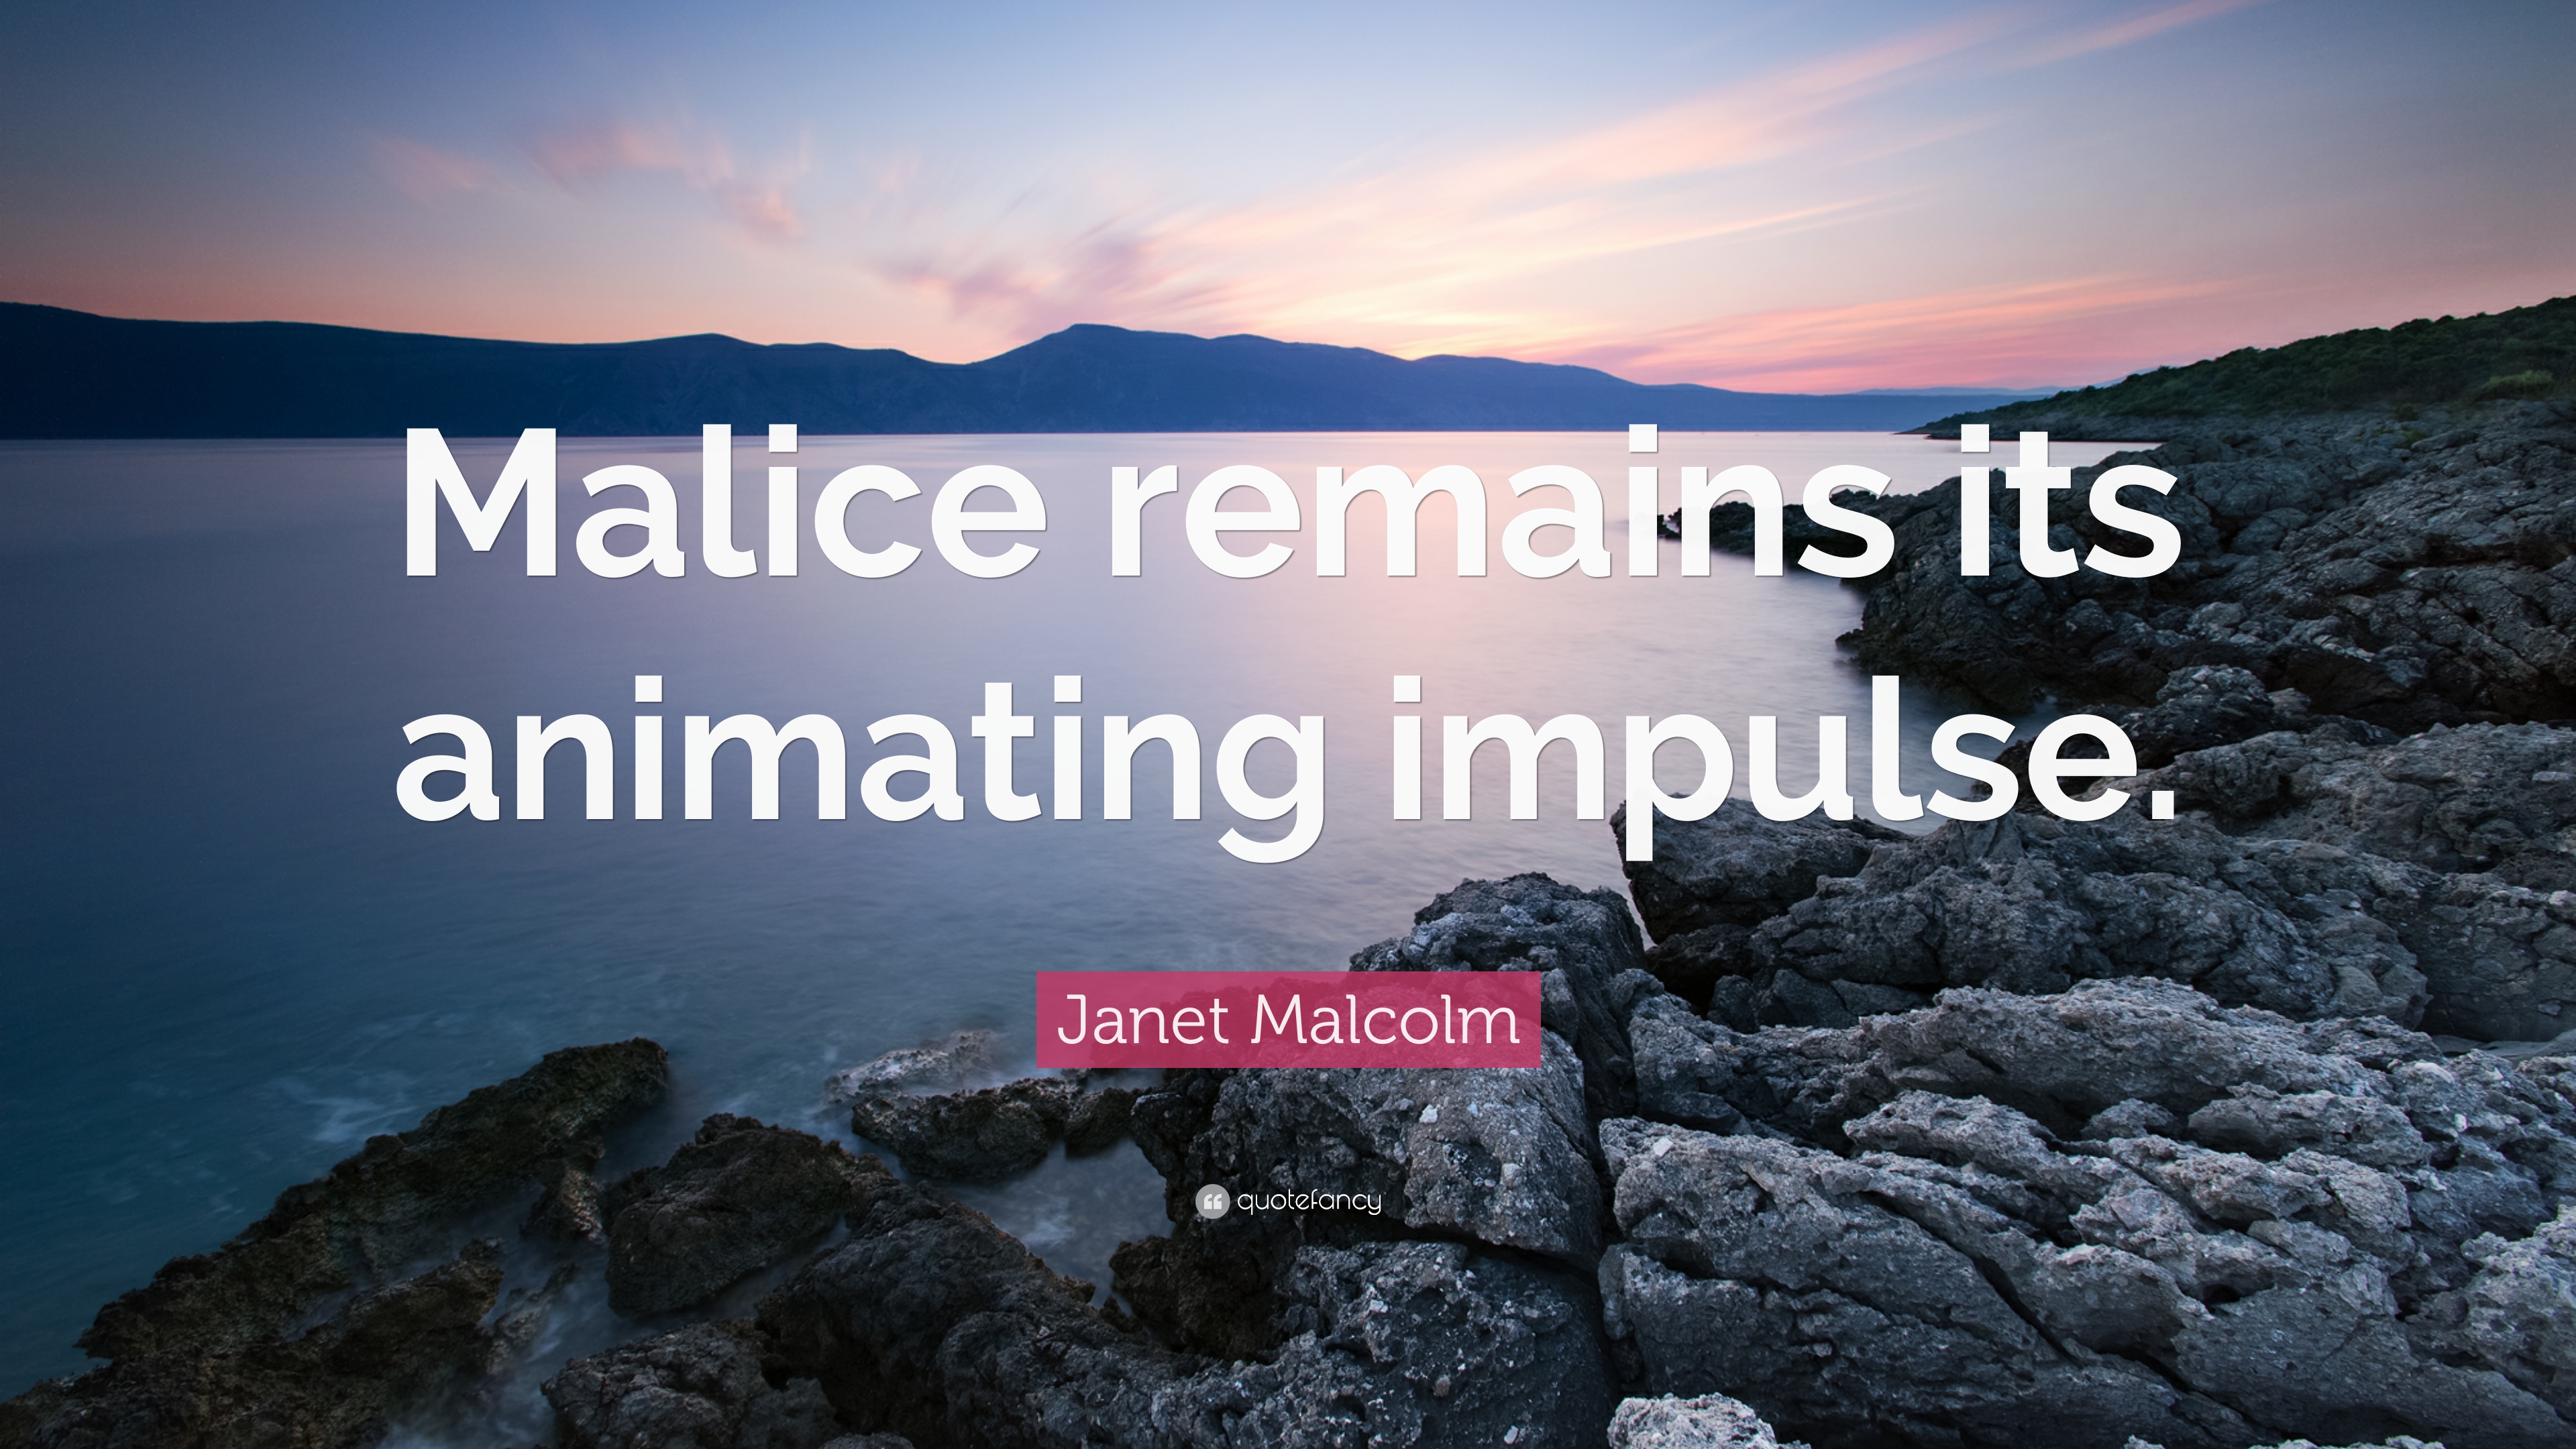 Janet Malcolm Quote: “Malice remains its animating impulse.” 7